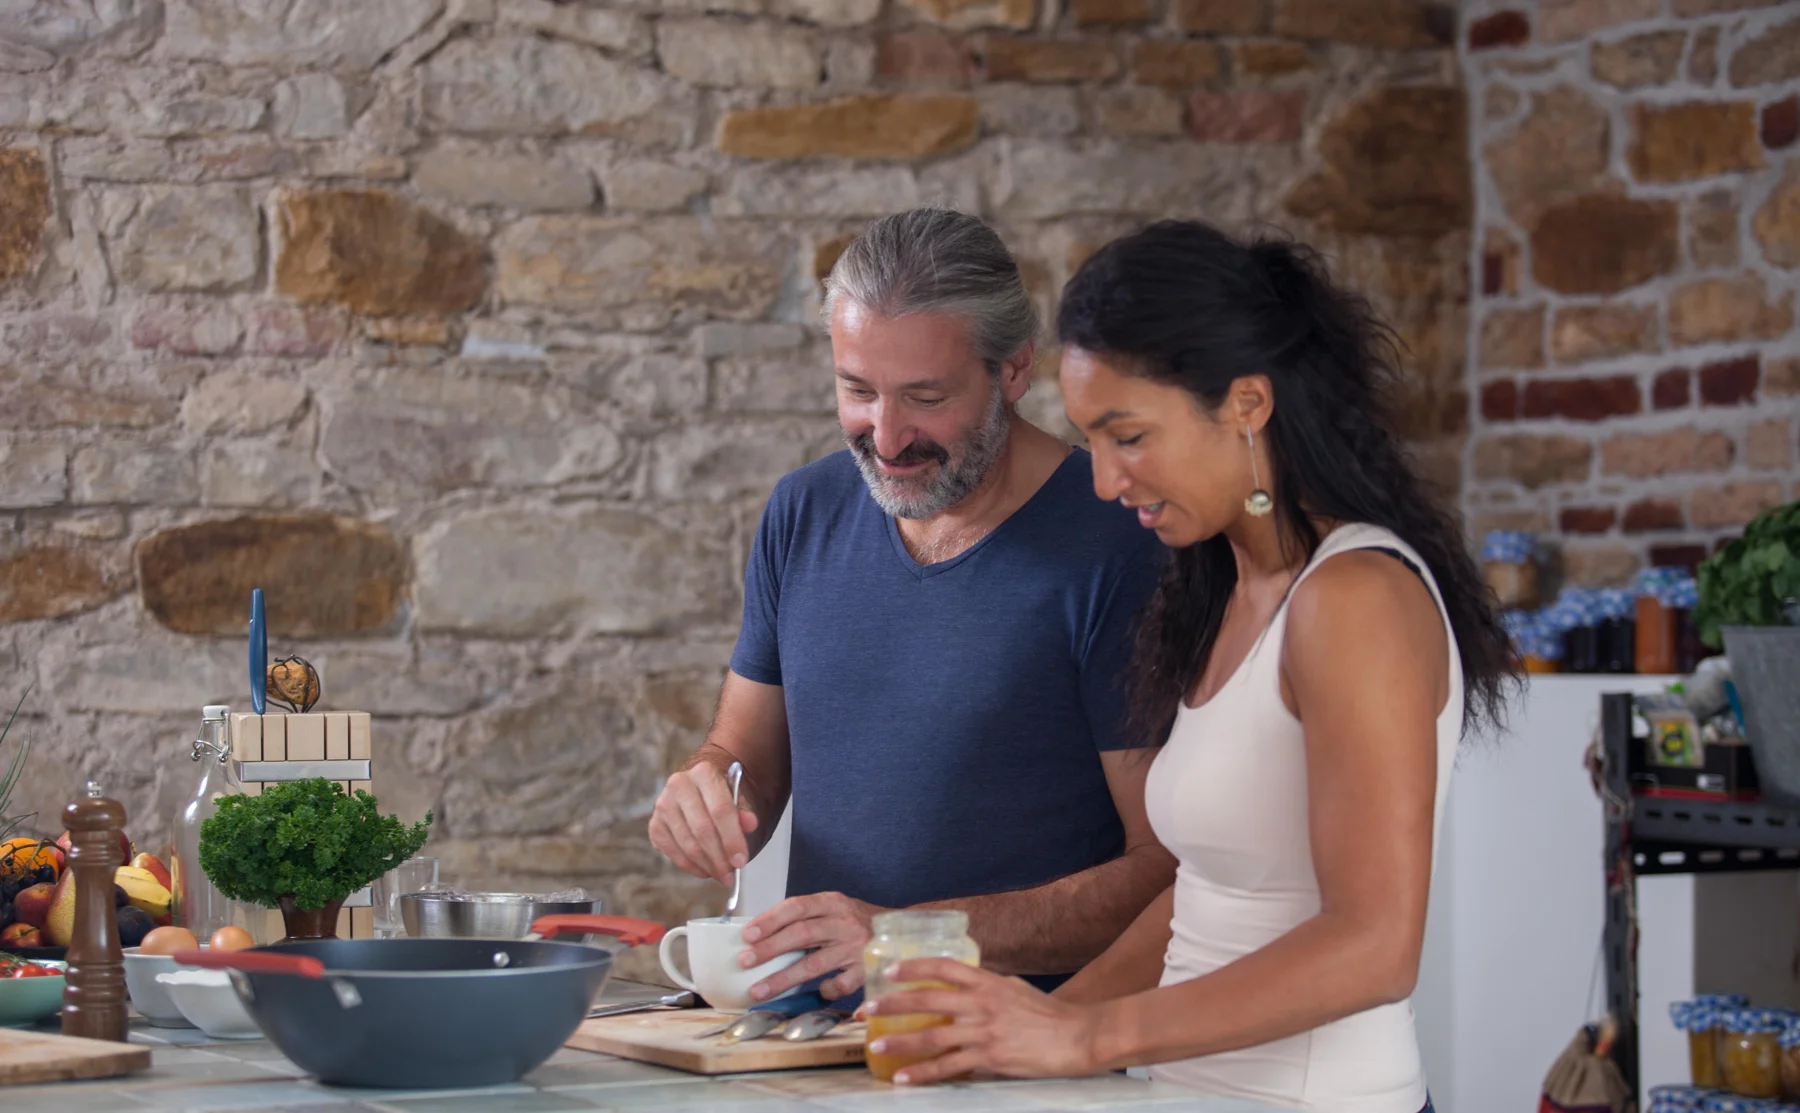 Enjoy a Czech Cooking Class in a Charming 400-Year-Old Building & Dinner - 1019779